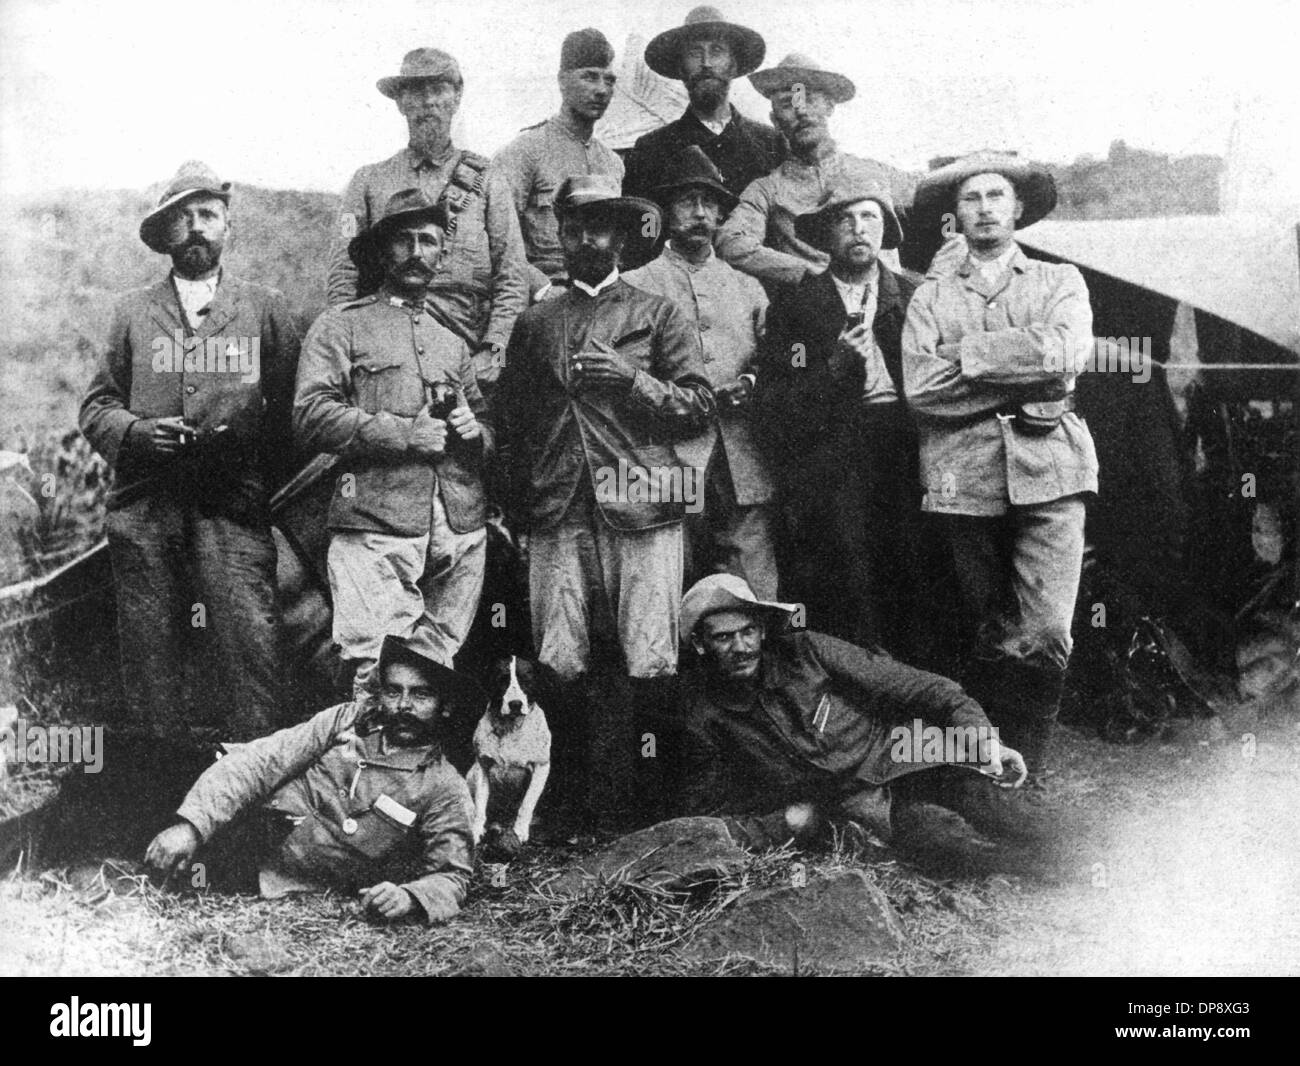 German officers who volunteered to fight for the Boers. Great Britain felt constricted in their plans to expand their colonial empire 'from the Cape to Cairo', because of the strict aliens acts as well as the denial of full civil rights for British and other foreigners in the Boer republics of Orange Free State and South African republic. This conflict resulted in the Second Boer War that started in 1899, and the British occupied the Boer republics in 1900. During the following guerilla war Great Britain sent the wives and children of the guerillas into concentration camps, in order to break t Stock Photo